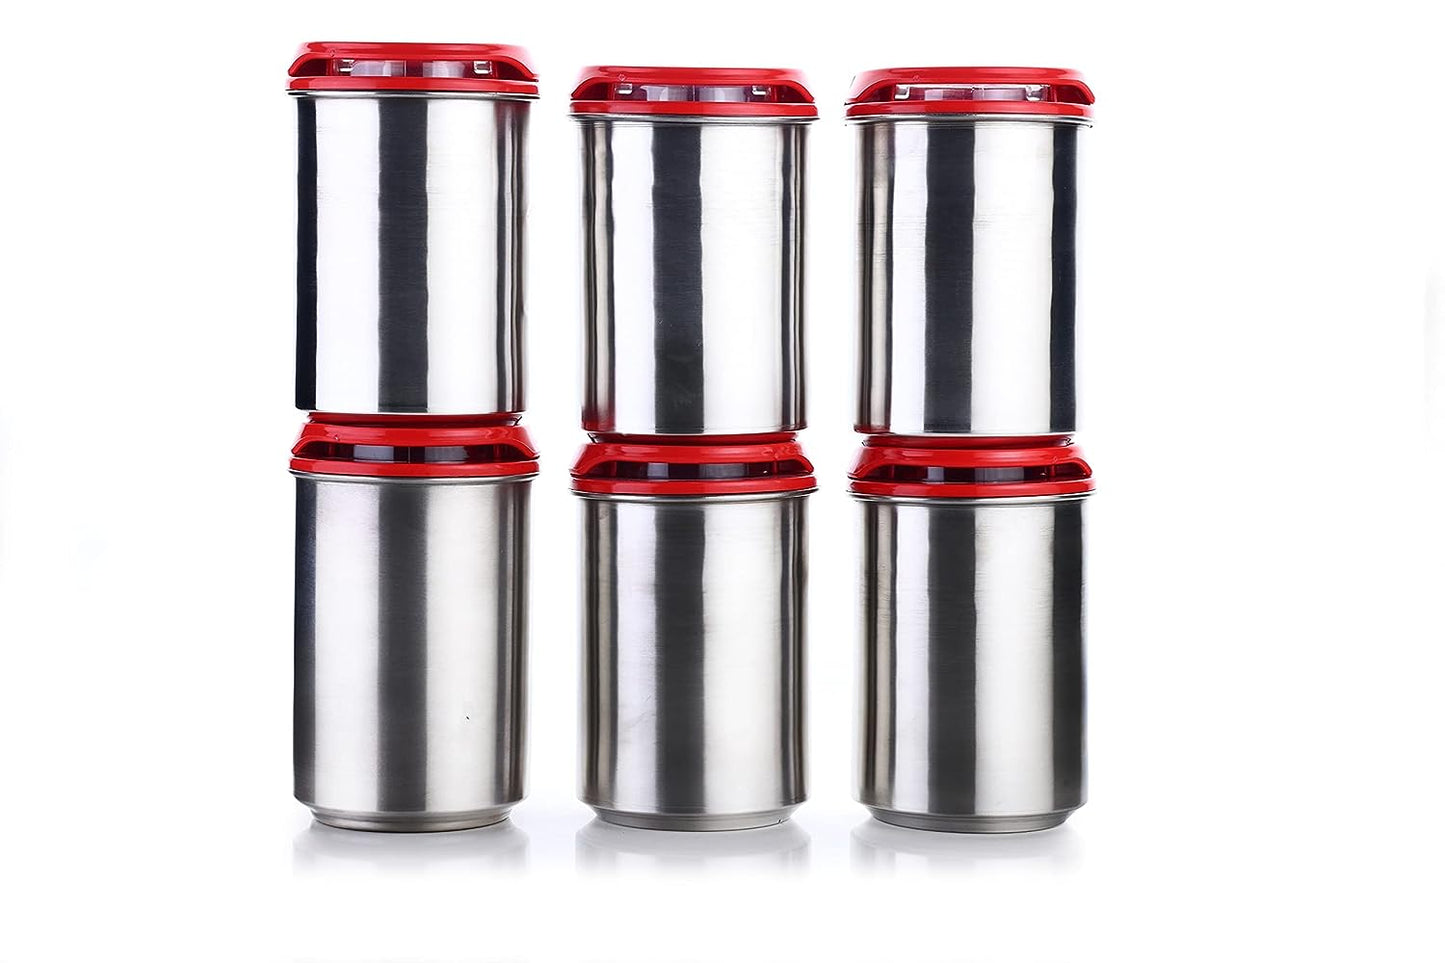 Machak Steel Airtight Containers Set For Kitchen Storage, 1200ml (Red, Set of 6)